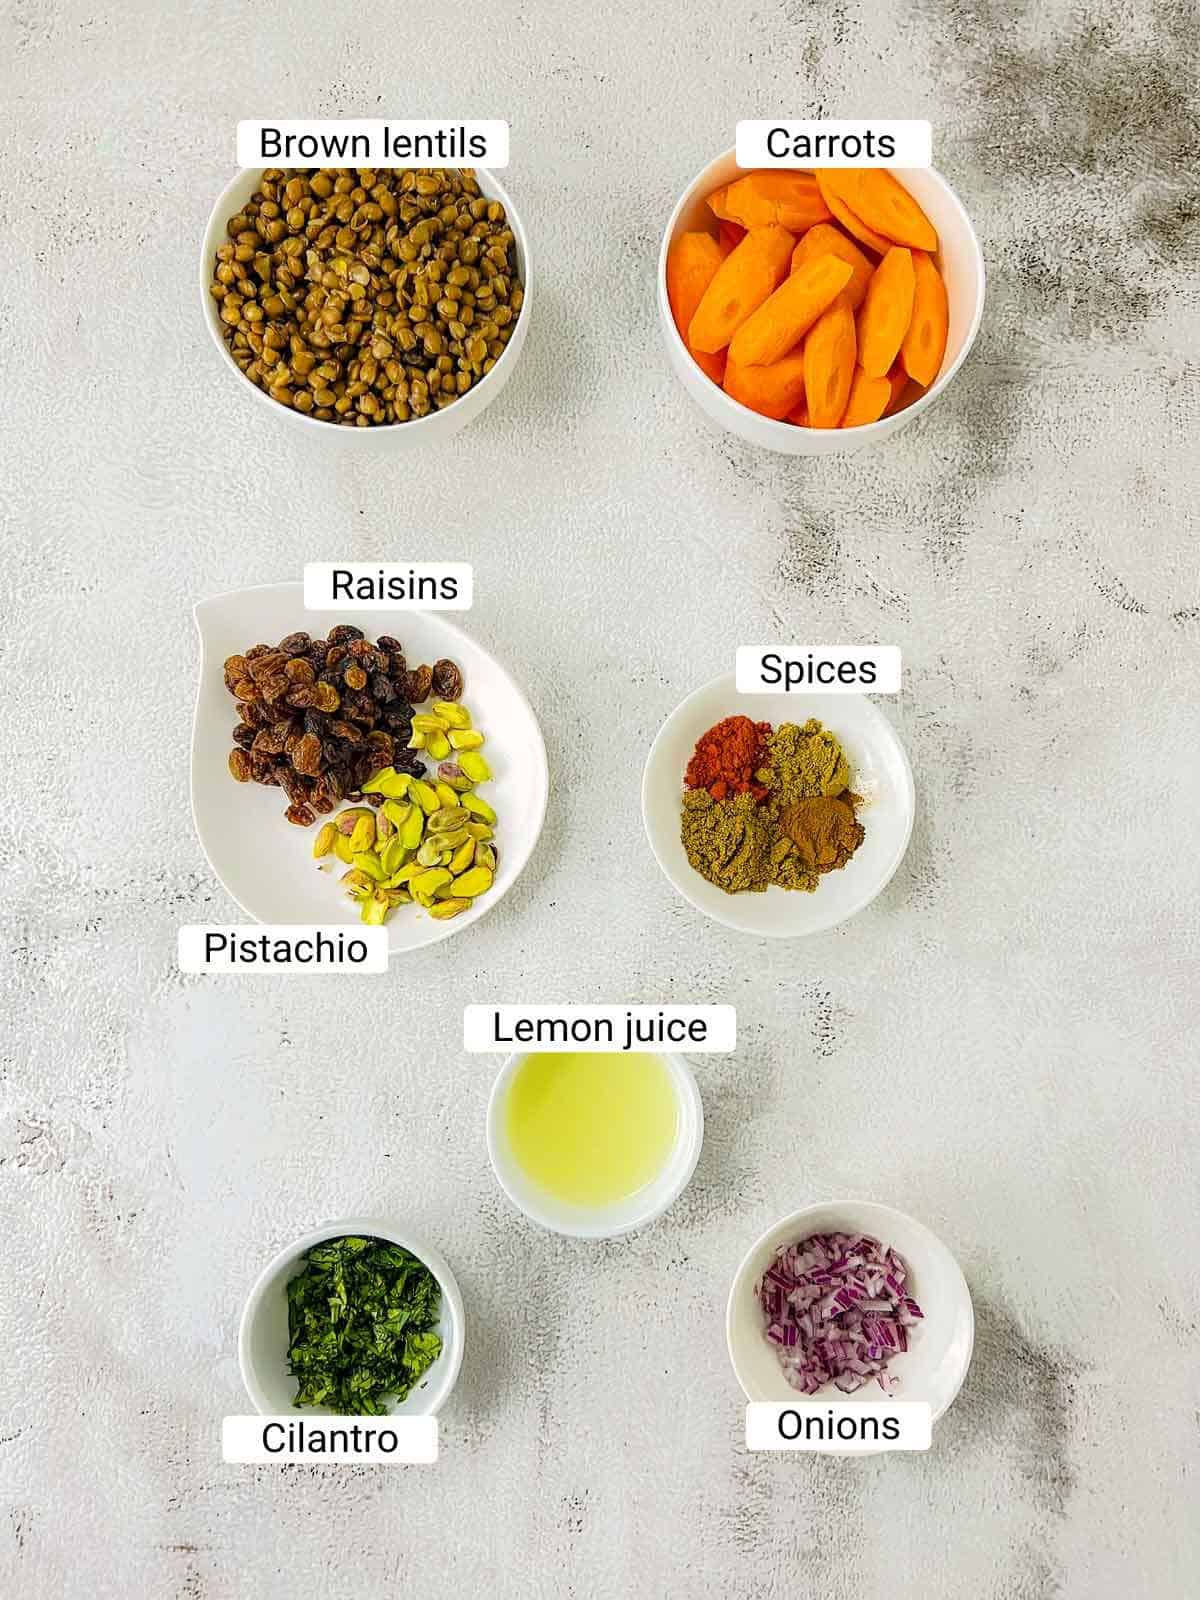 Ingredients to make Moroccan lentil and carrot salad on a white surface.